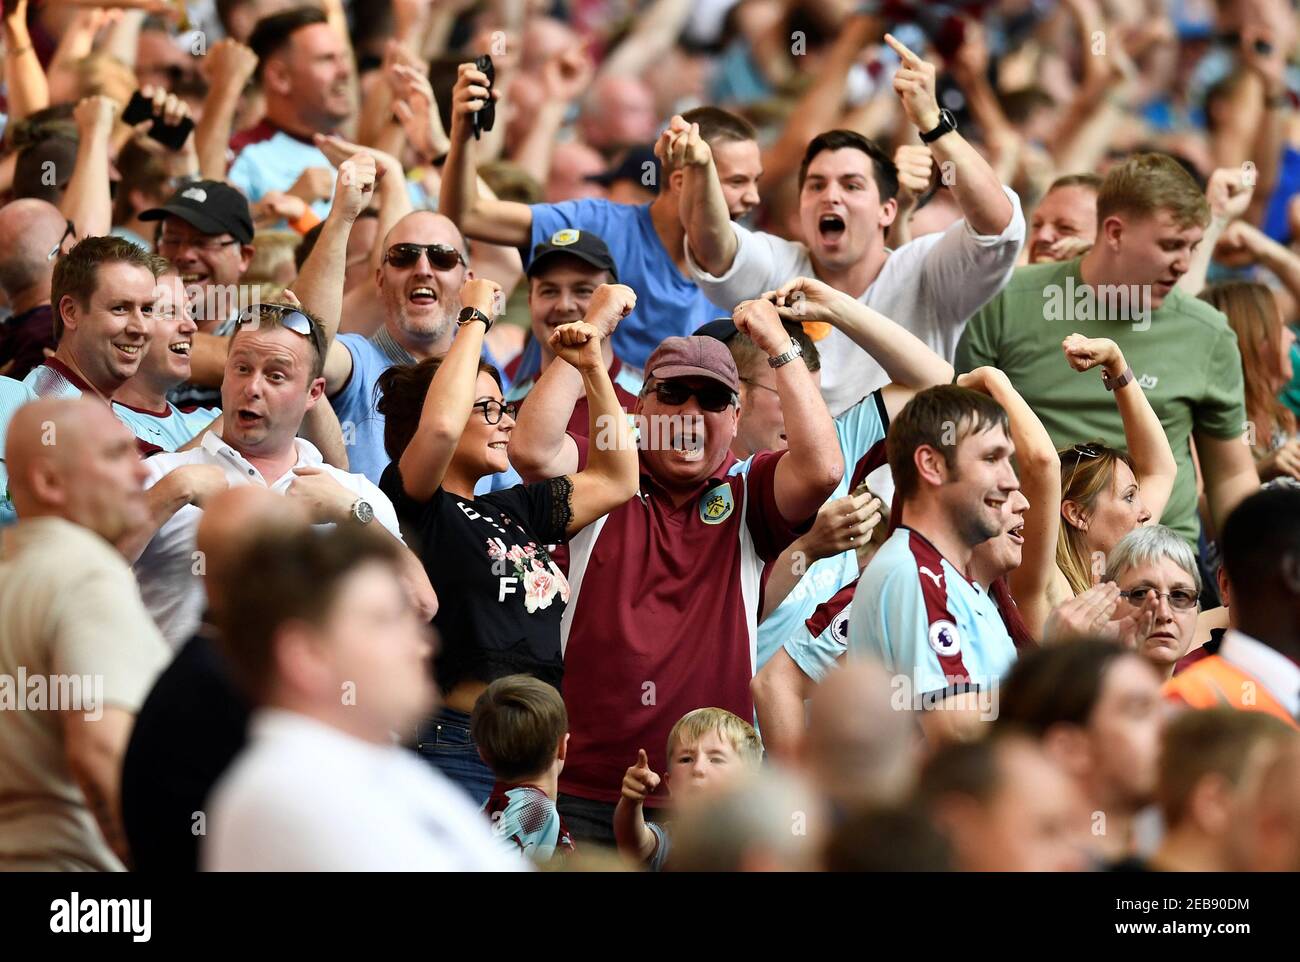 Soccer Football - Premier League - Tottenham Hotspur vs Burnley - London, Britain - August 27, 2017   Burnley fans celebrate their first goal   REUTERS/Dylan Martinez    EDITORIAL USE ONLY. No use with unauthorized audio, video, data, fixture lists, club/league logos or 'live' services. Online in-match use limited to 45 images, no video emulation. No use in betting, games or single club/league/player publications. Please contact your account representative for further details. Stock Photo